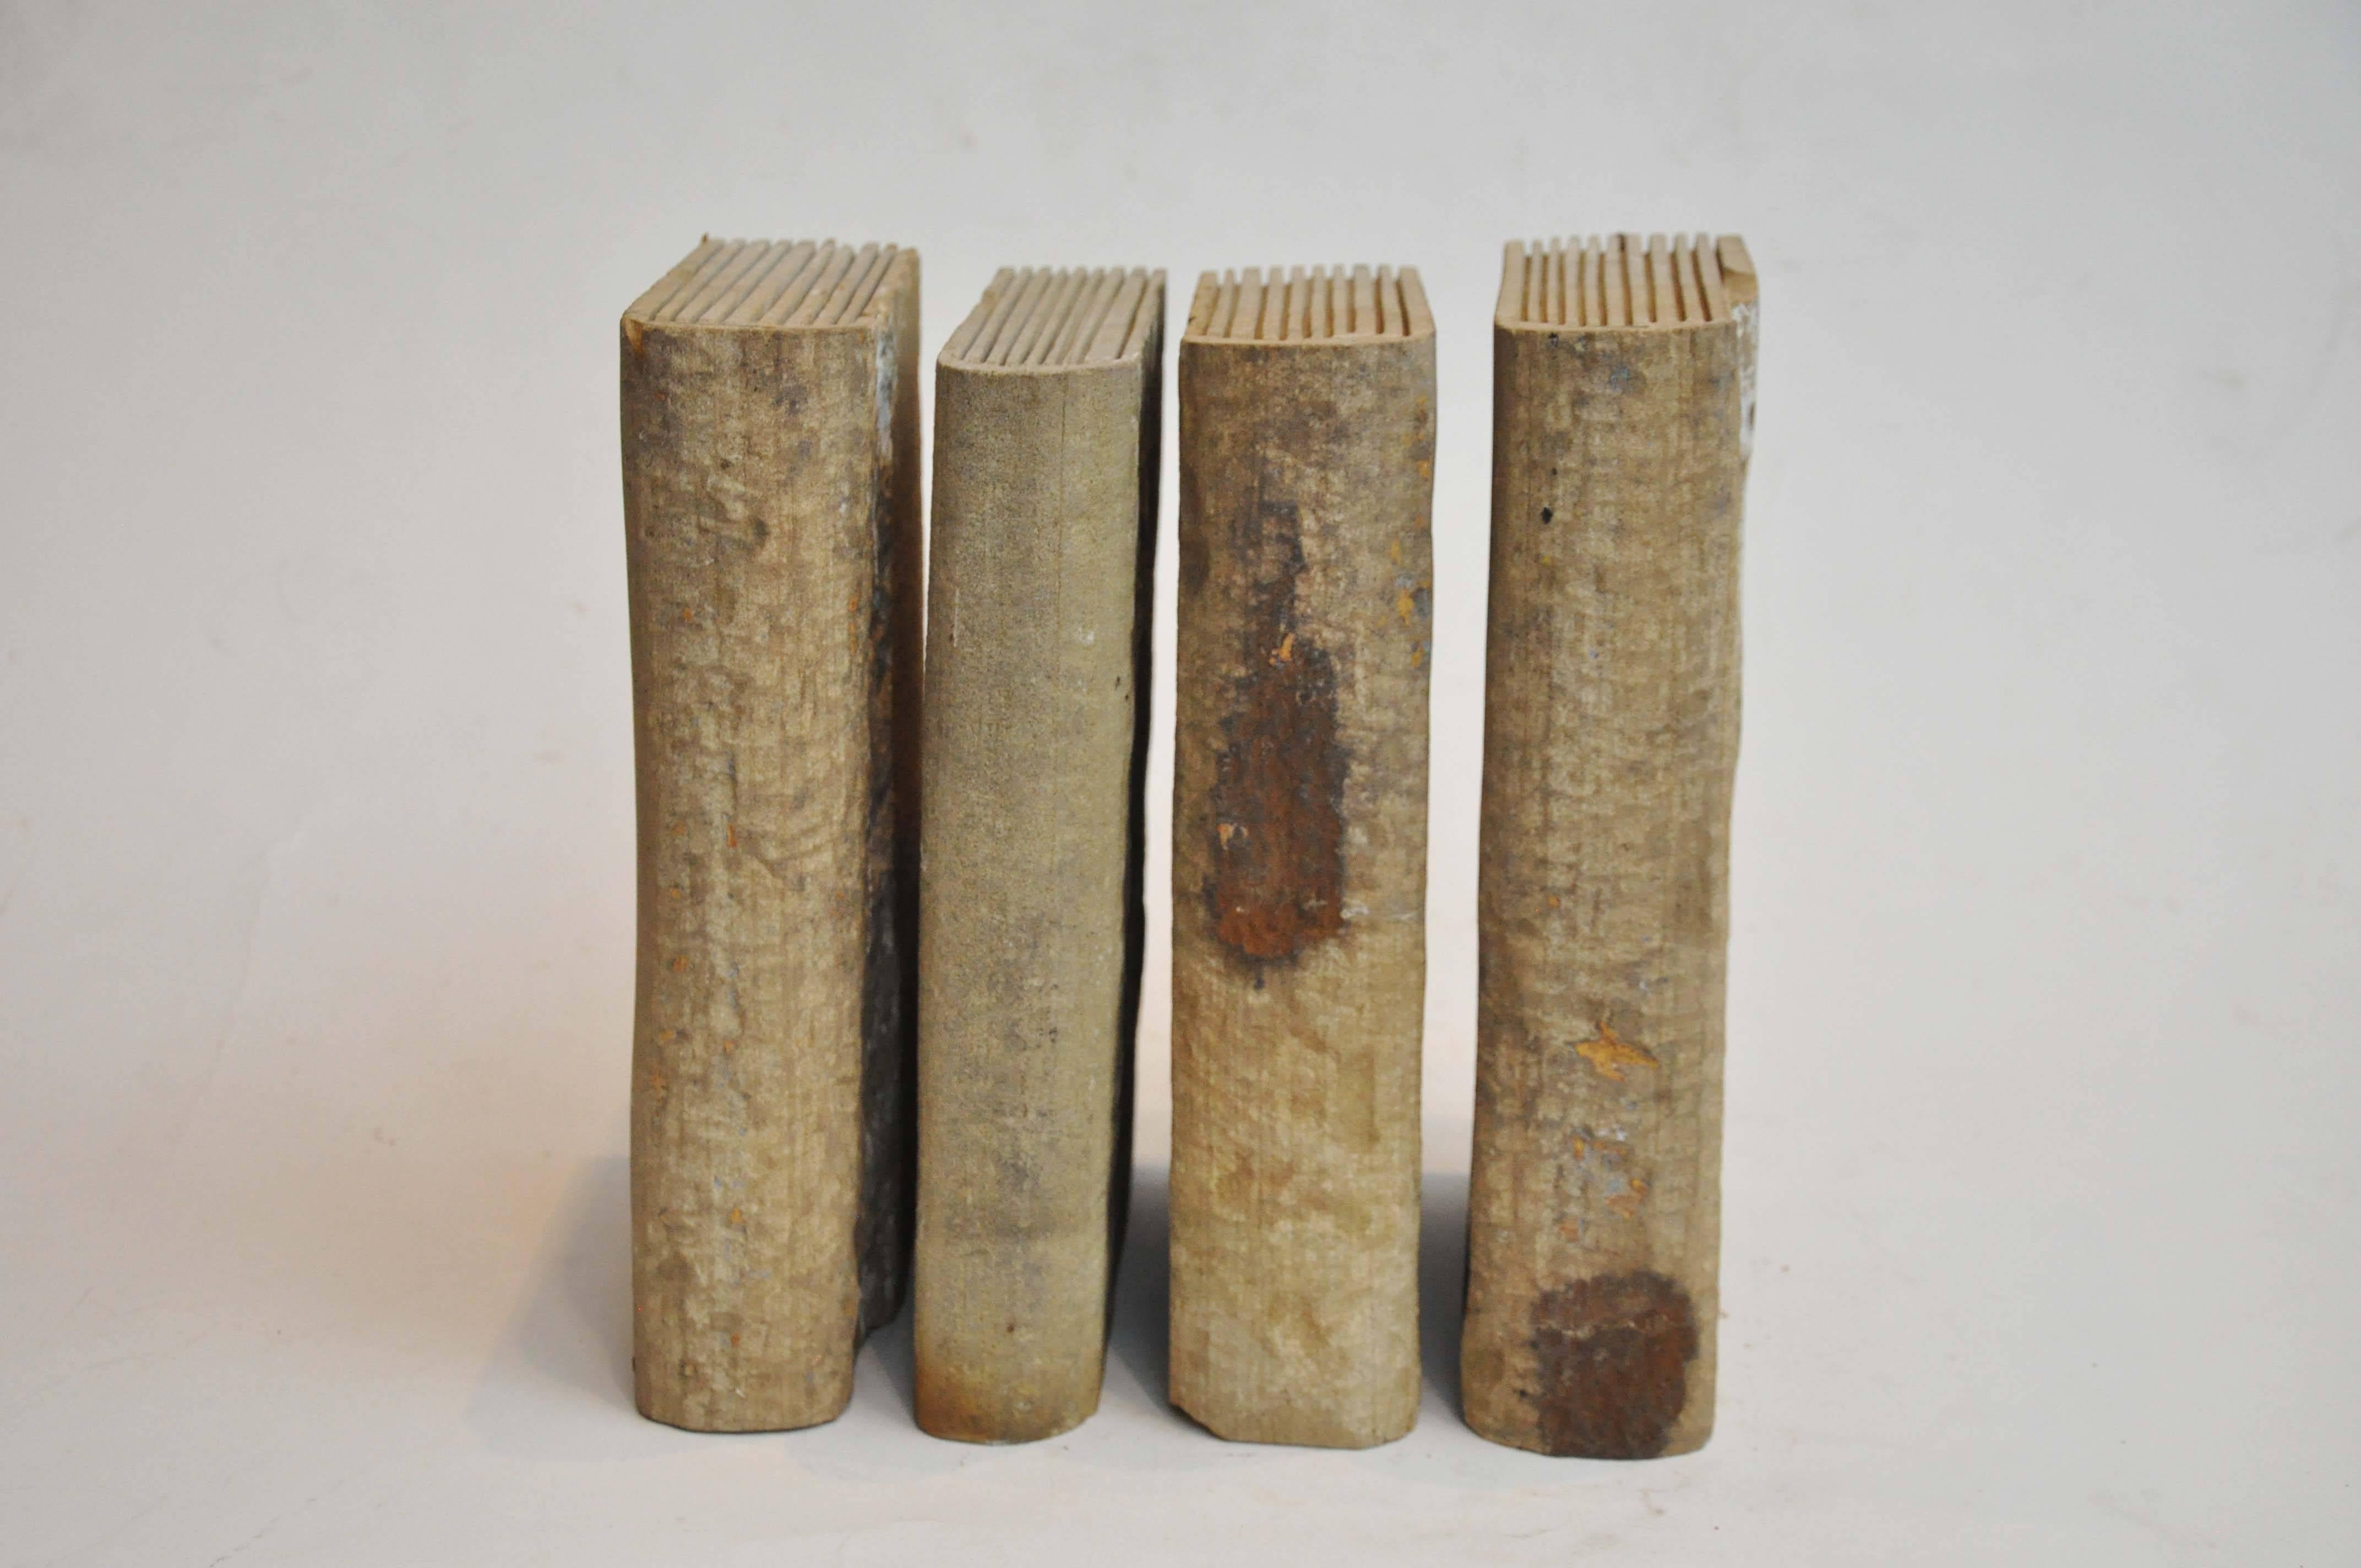 Early 20th century collection of four contrete books. Unique books created from concrete and feature page detail. Found in France.

Dimensions: 12